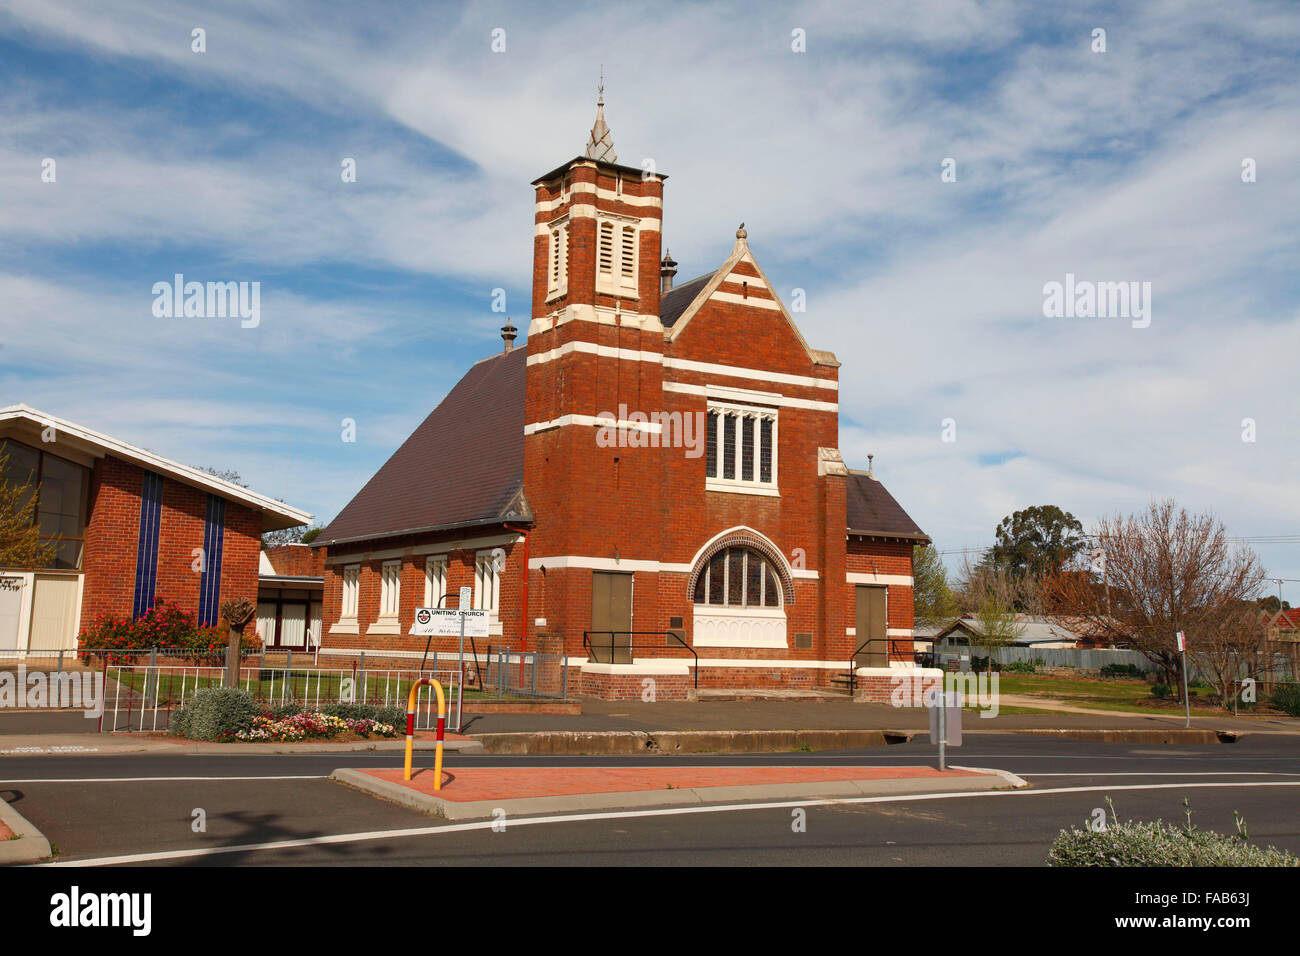 The former Methodist (1909) now Uniting Church built in the Arts & Crafts style - red brick Young NSW Australia Stock Photo